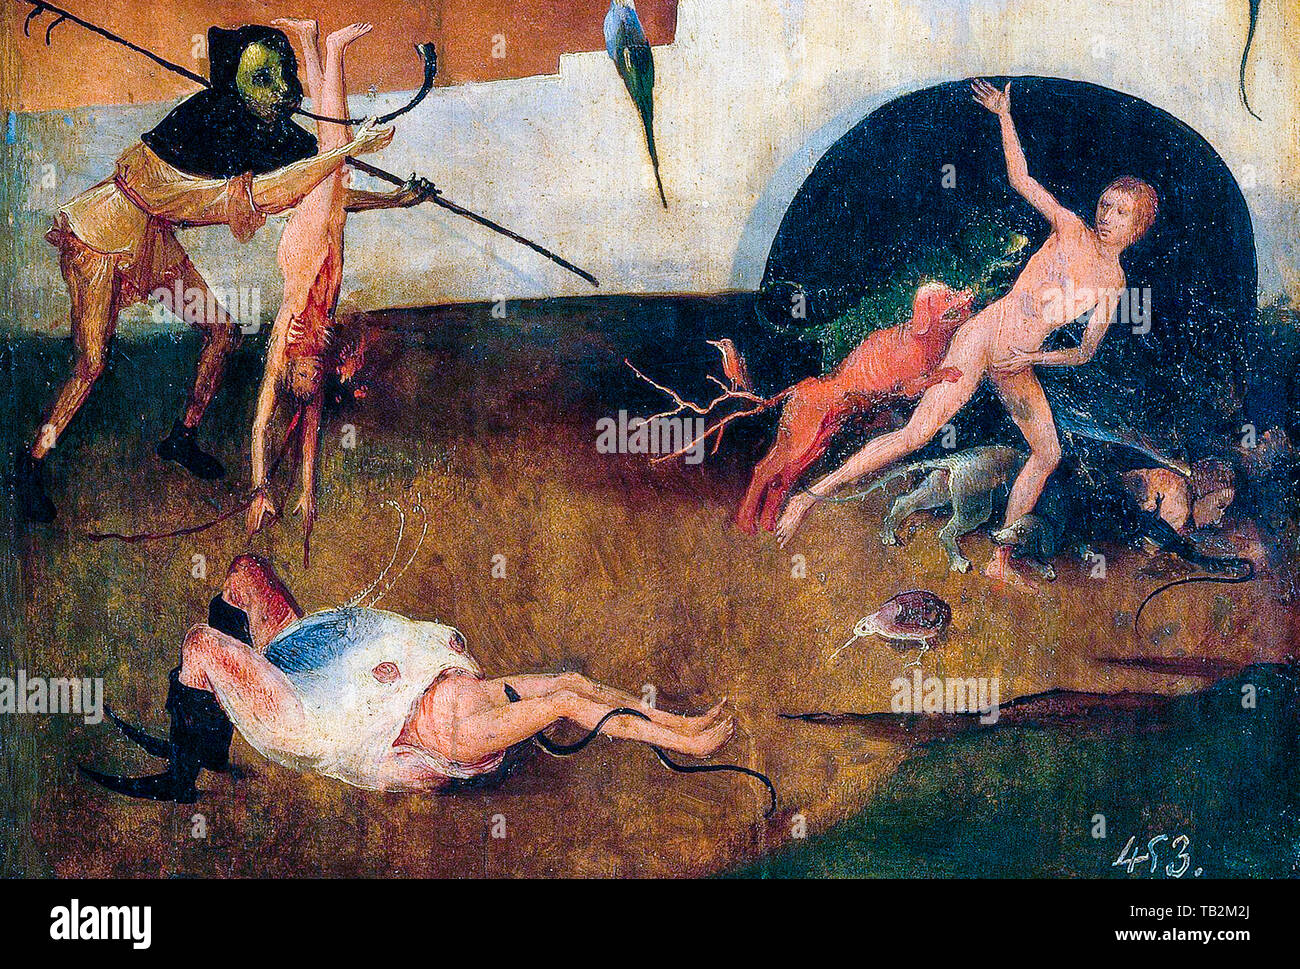 Hieronymus Bosch, The Hay Wagon (Prado), right panel, Detail, people being hunted, killed by demons, painting, circa 1516 Stock Photo